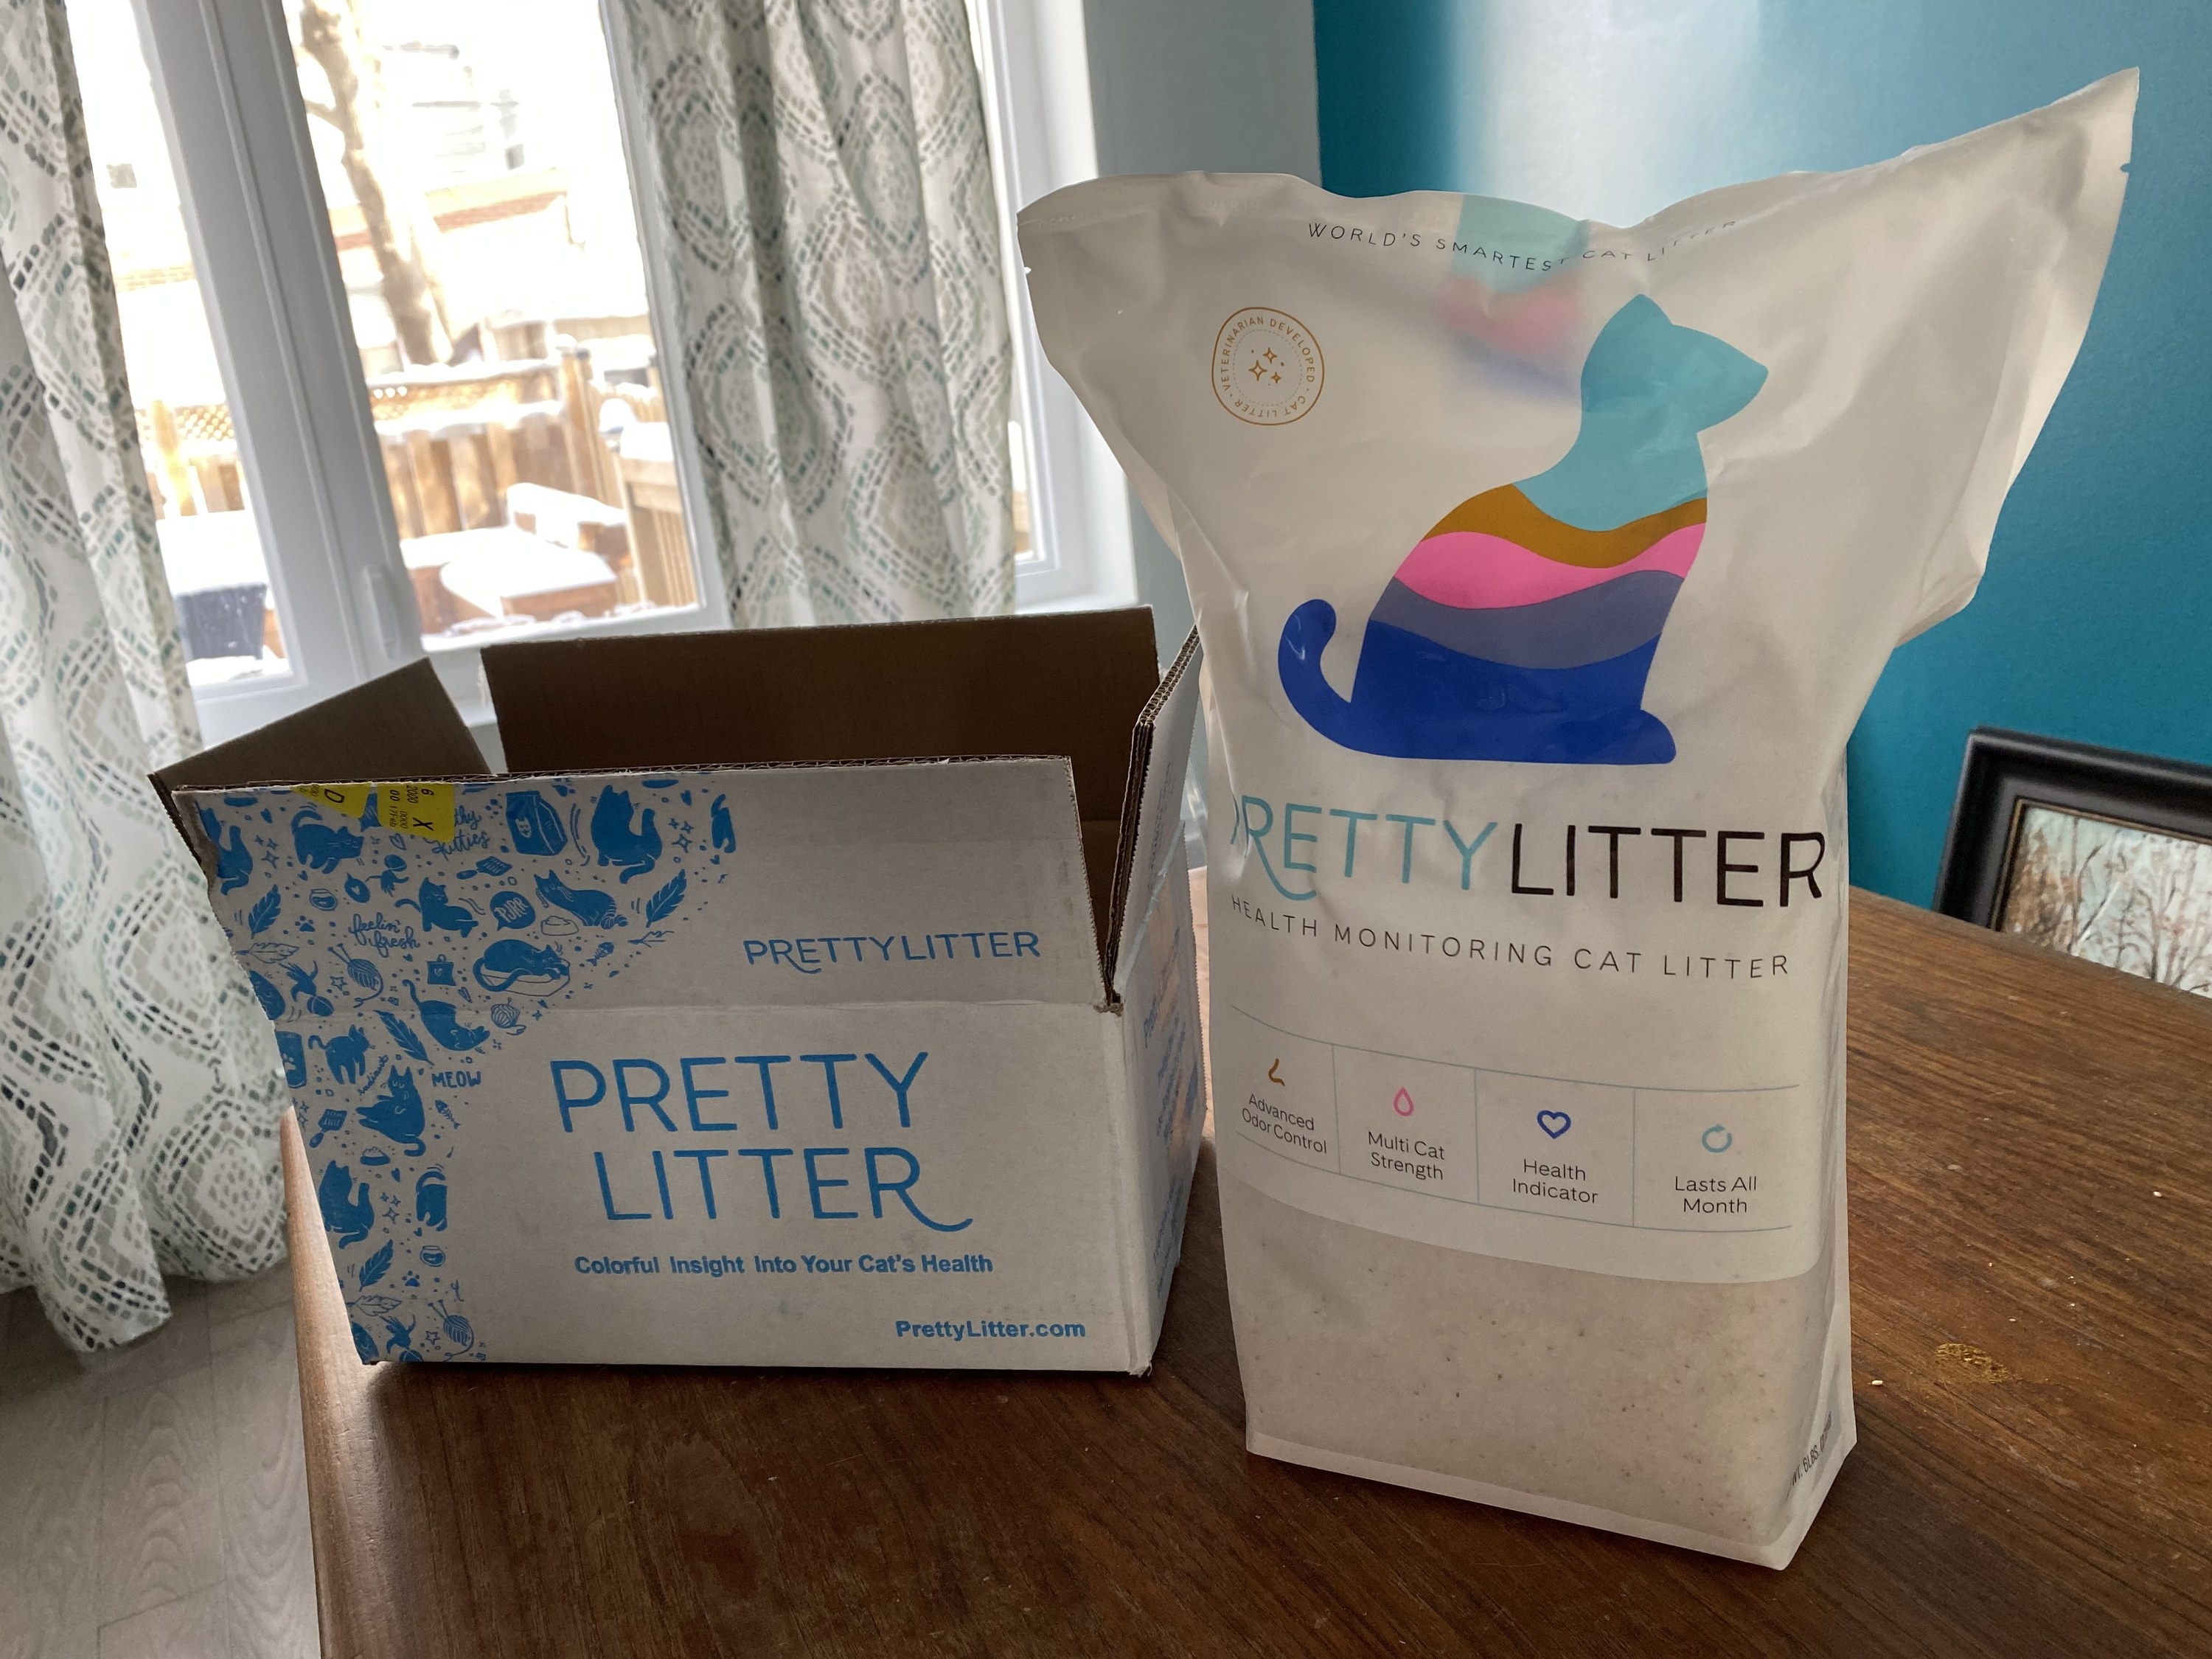 The bag of Pretty Litter and the small box it ships in